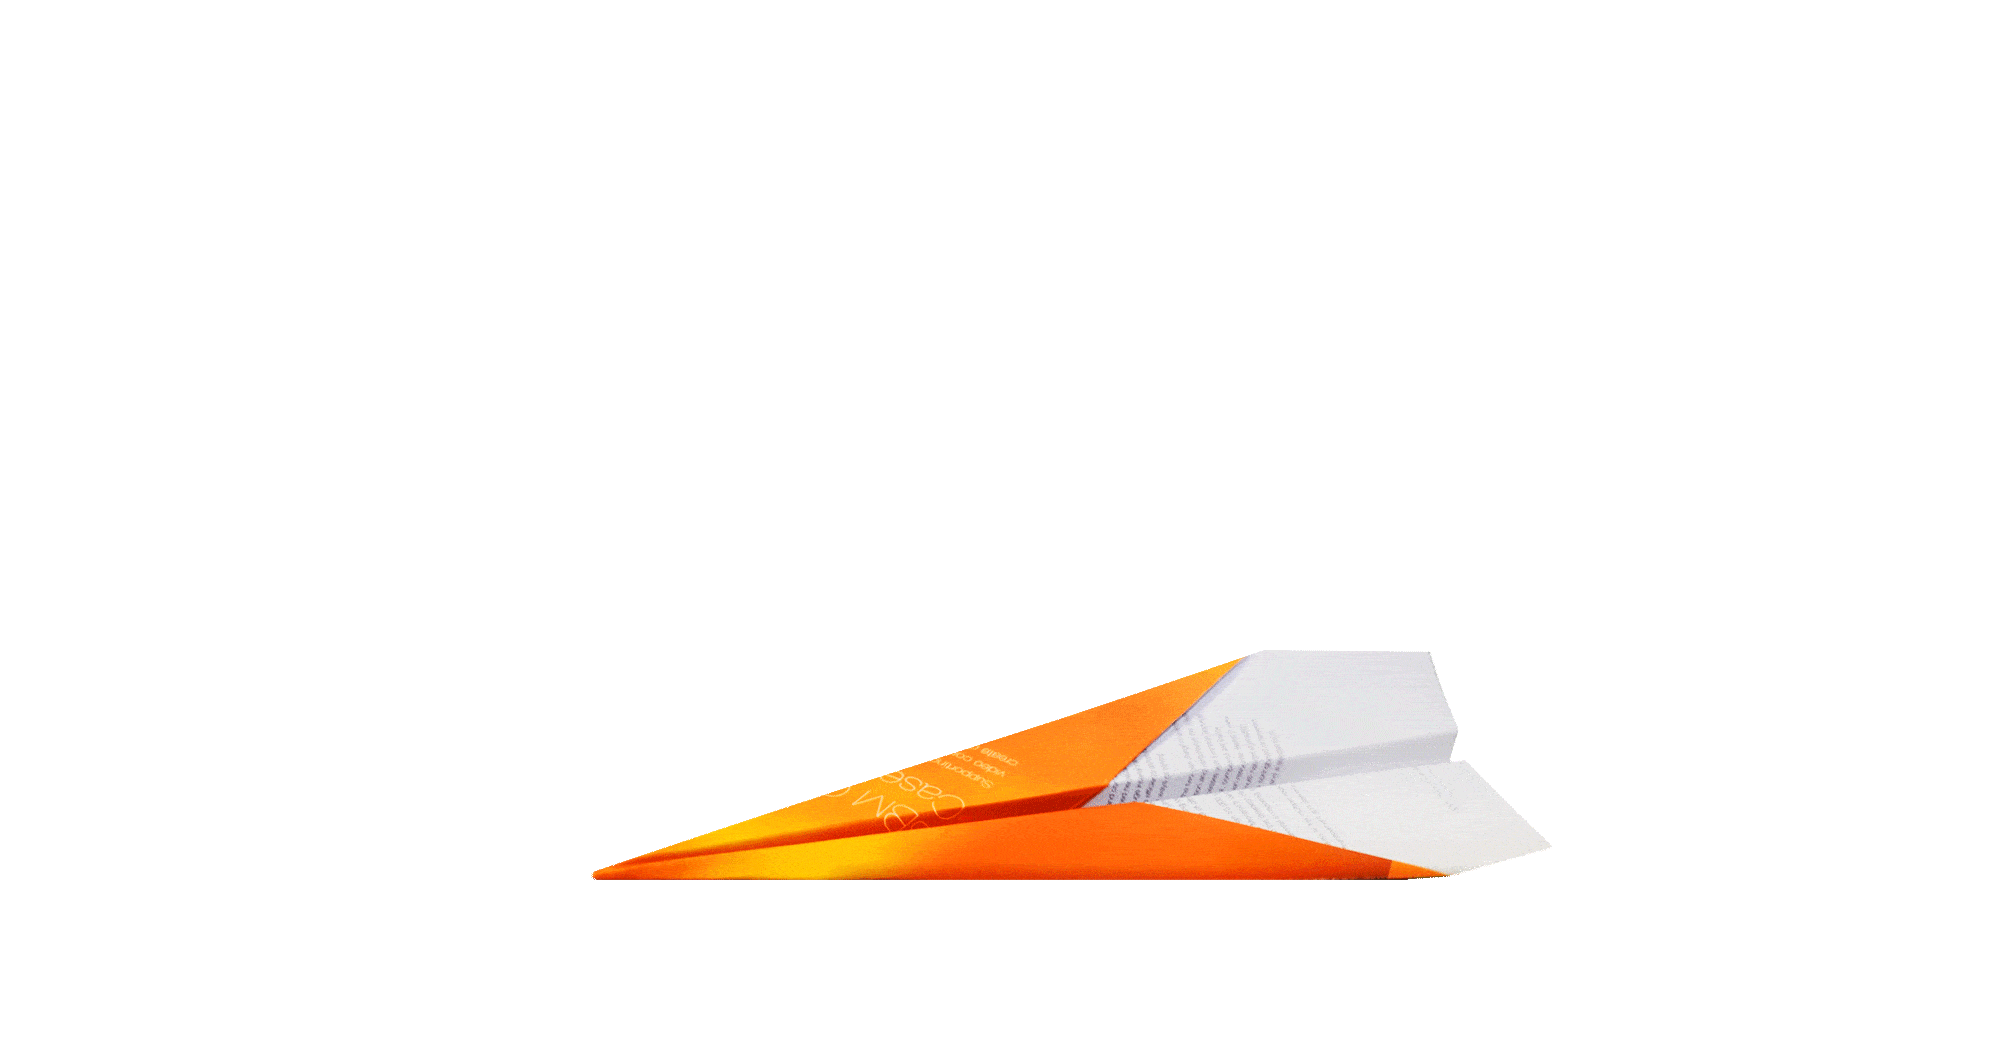 Orange paper plane gentle bouncing back and forth